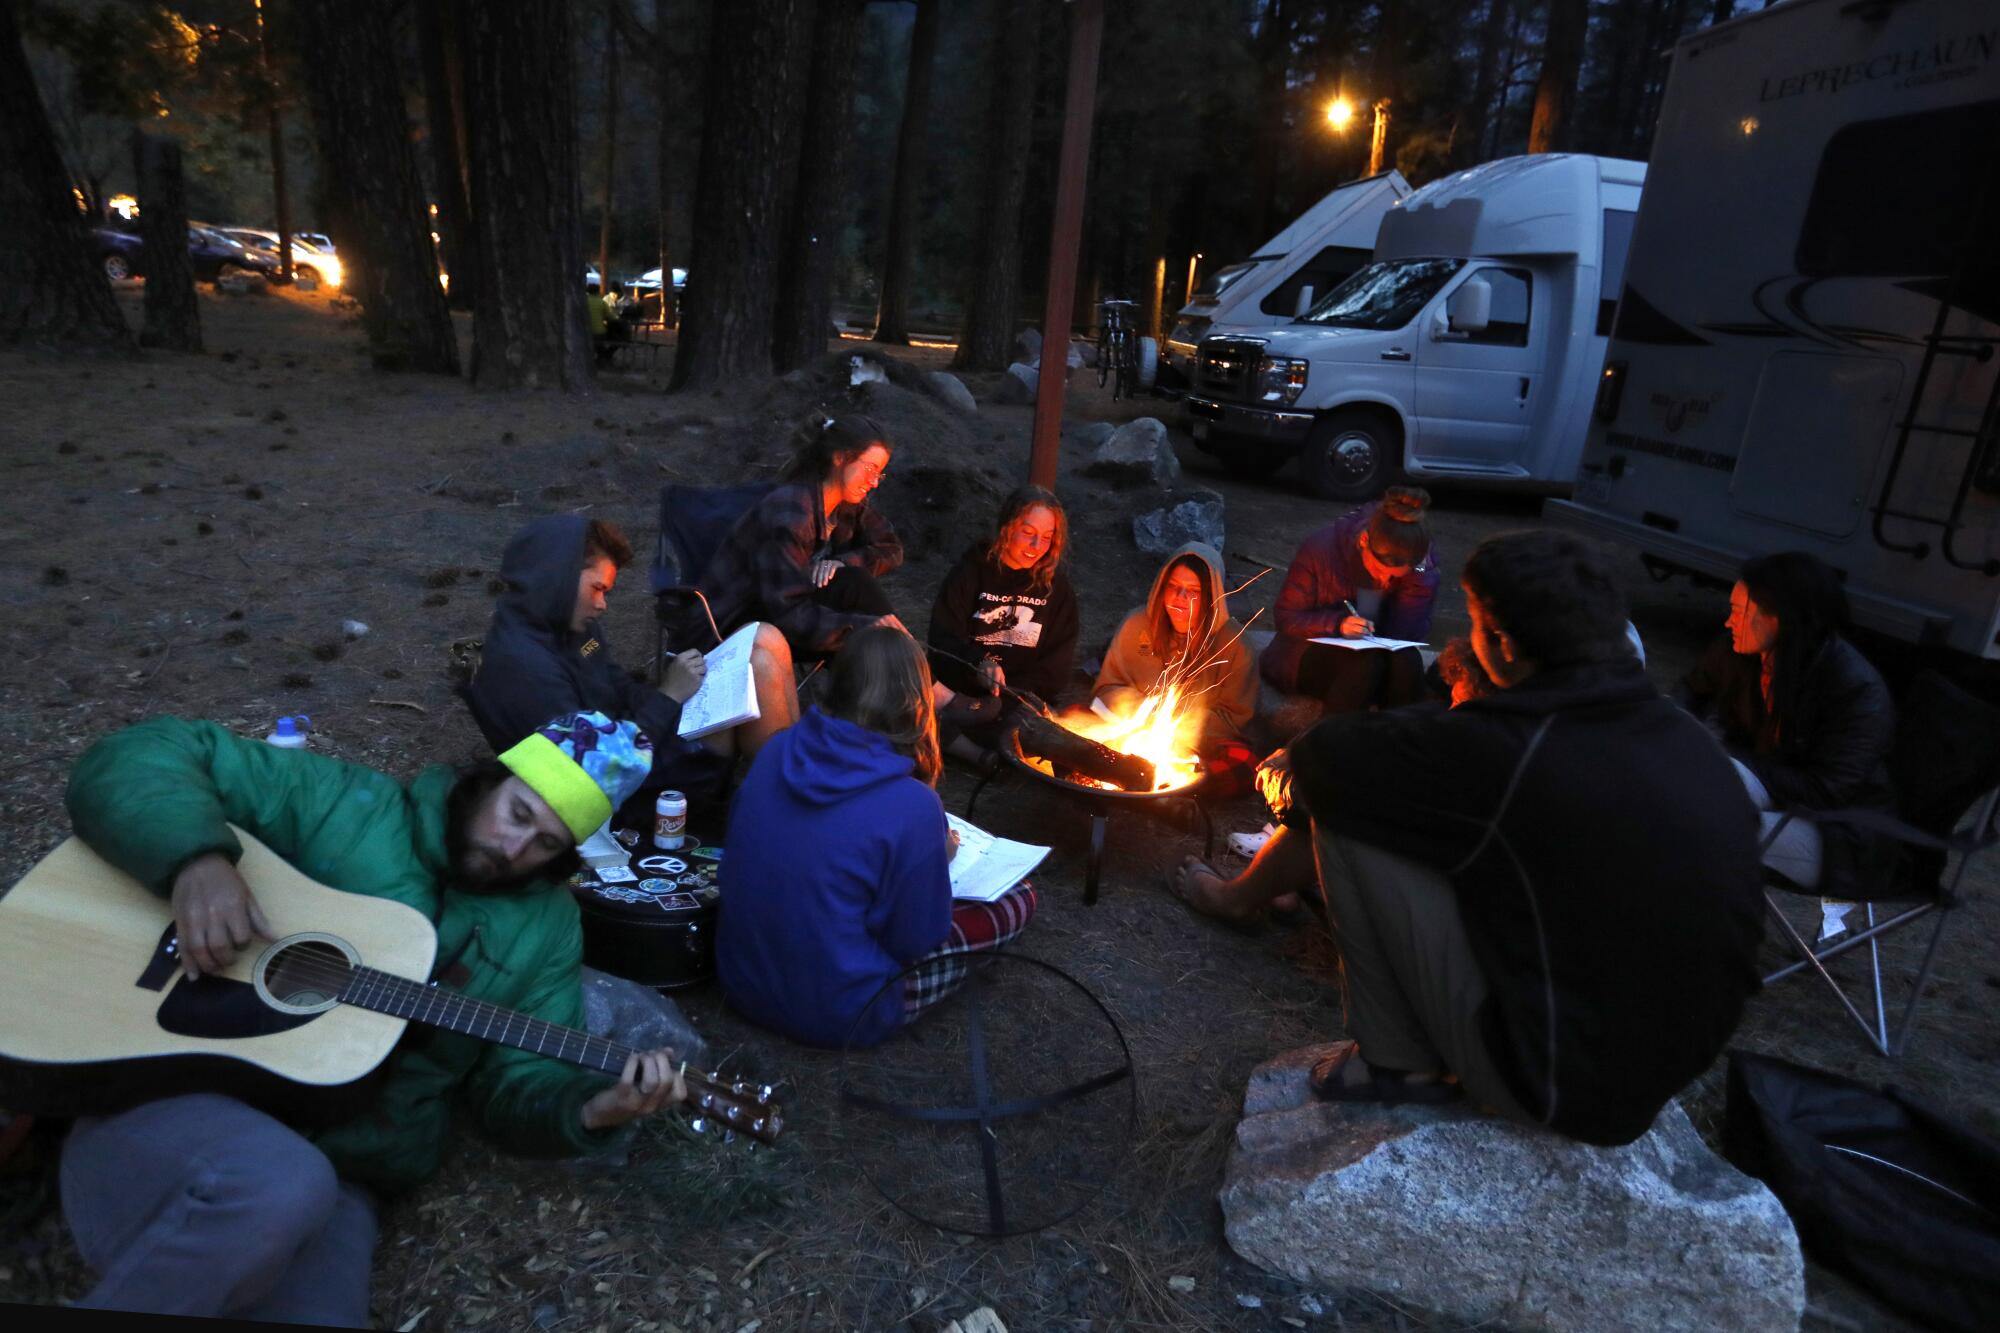 A man with a guitar lies against a rock as a group of teenagers surrounds a campfire